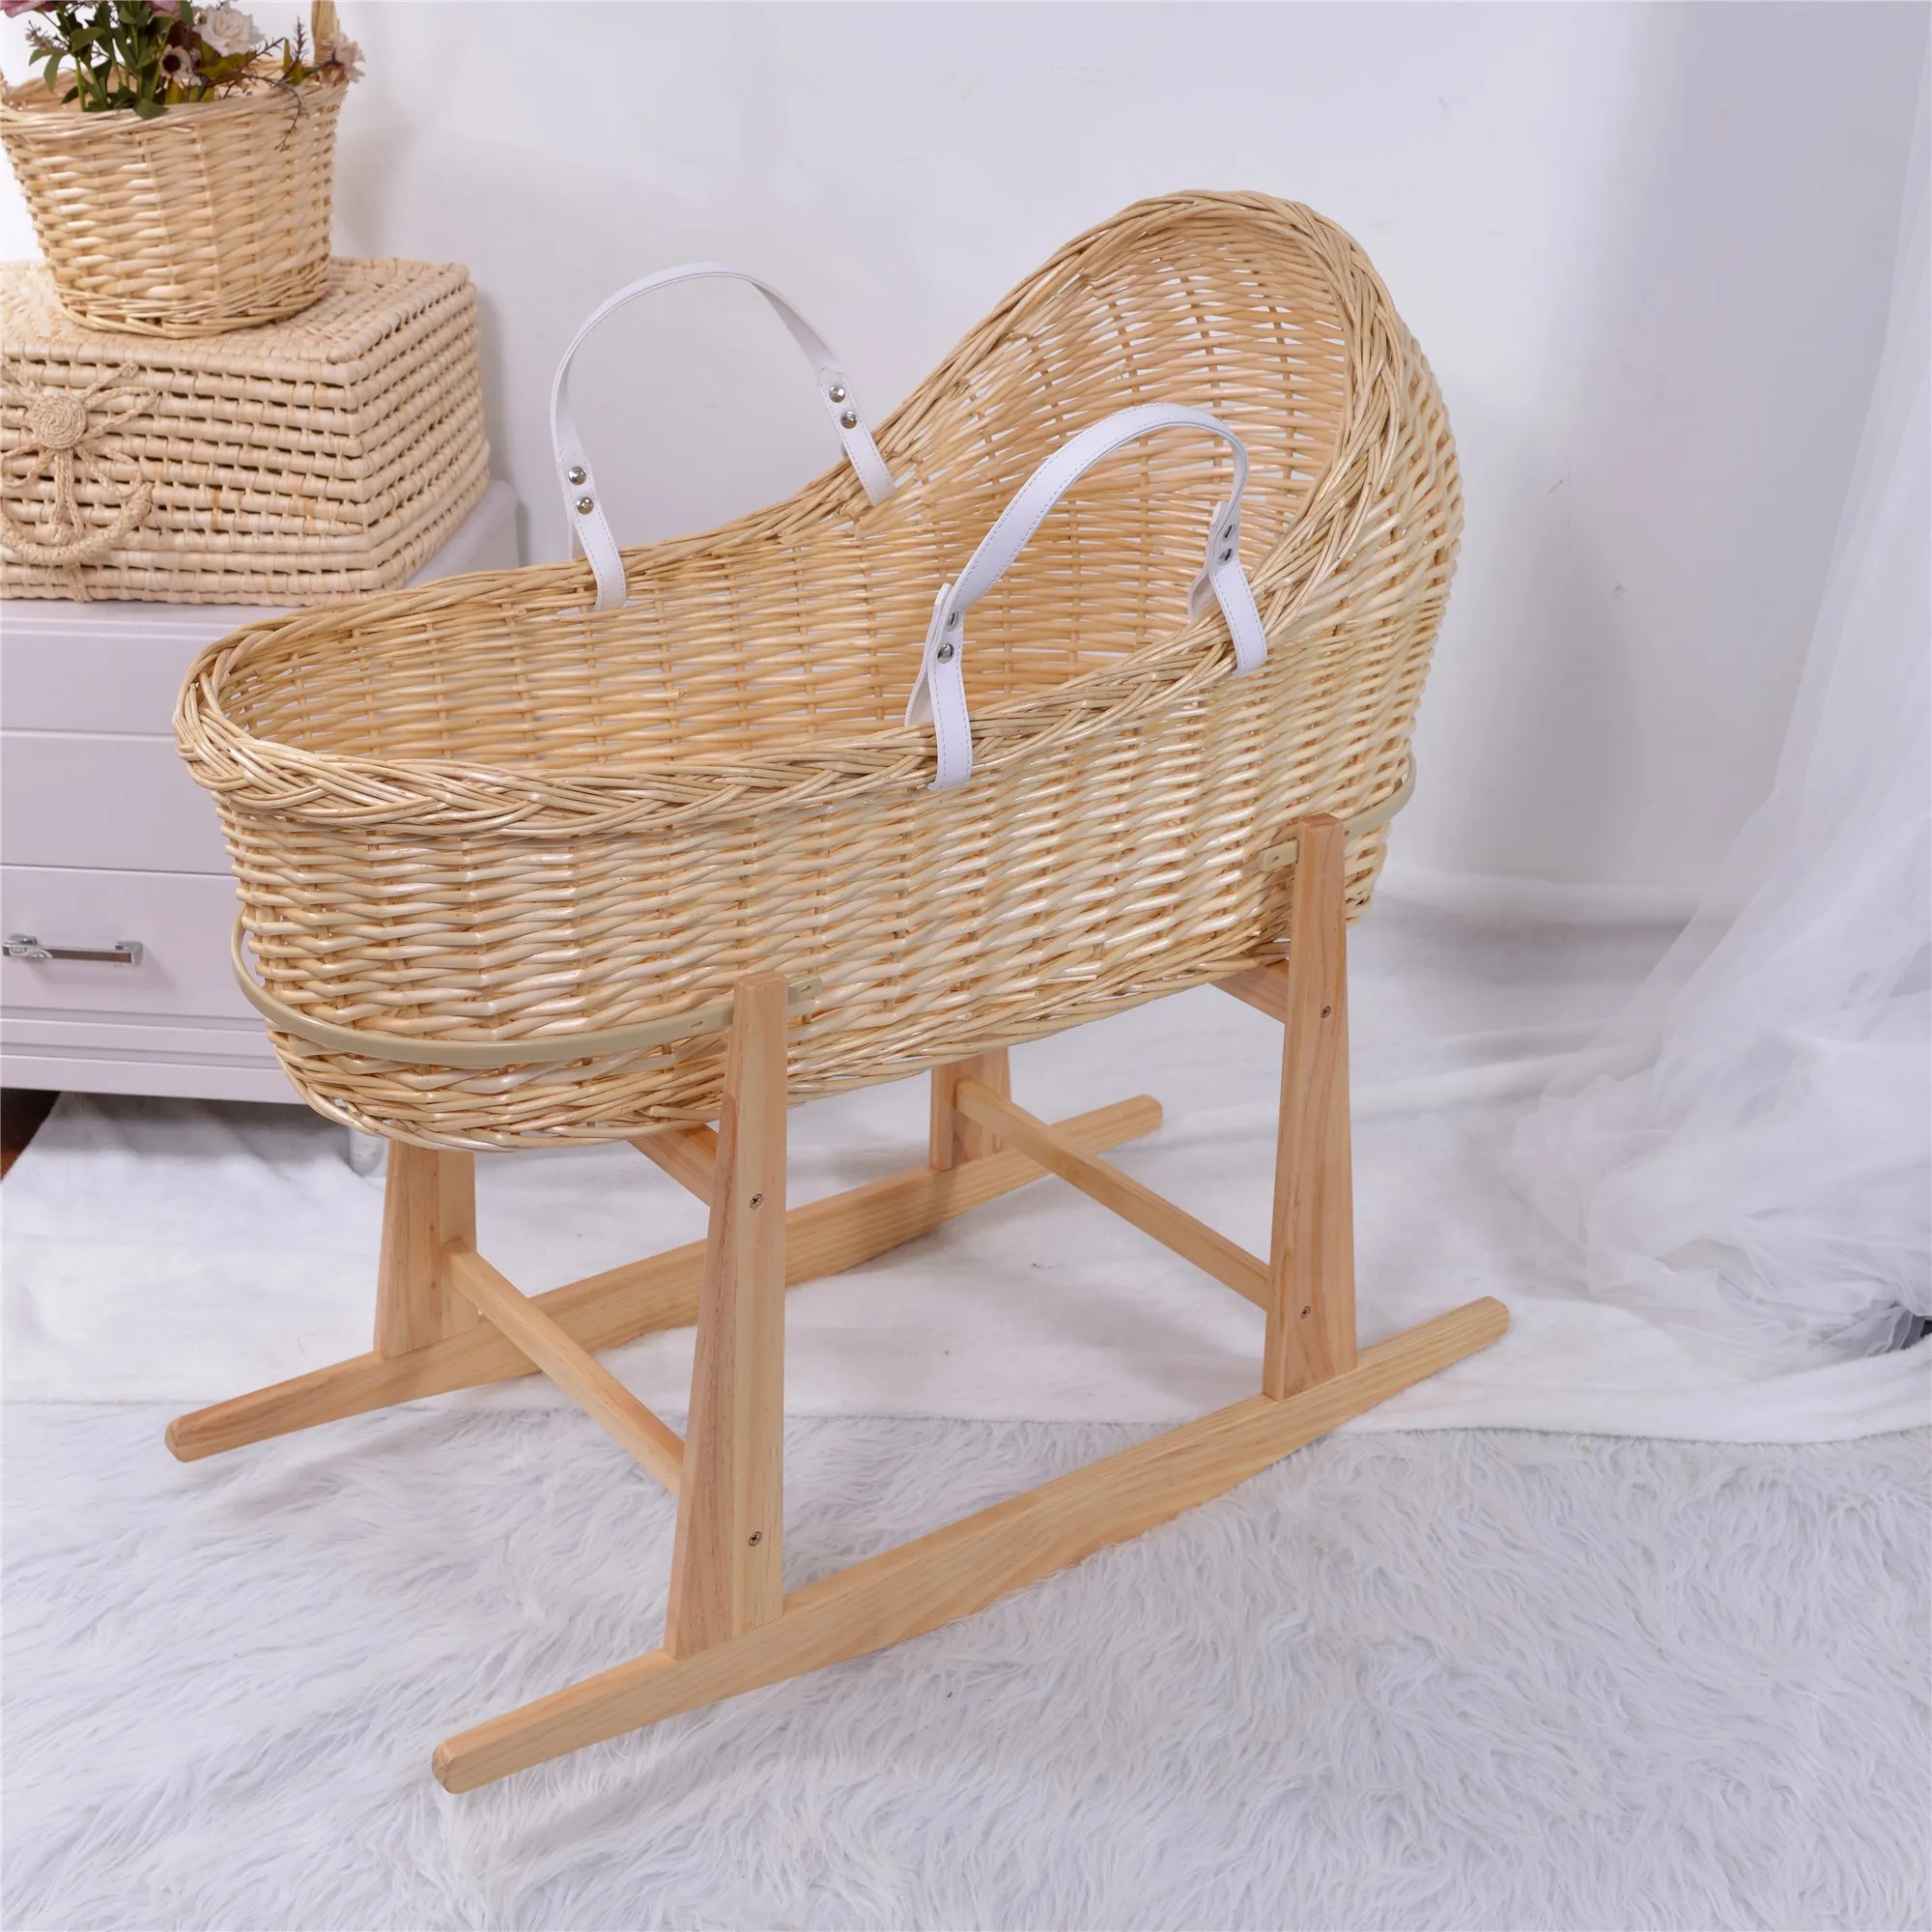 baby cot low price